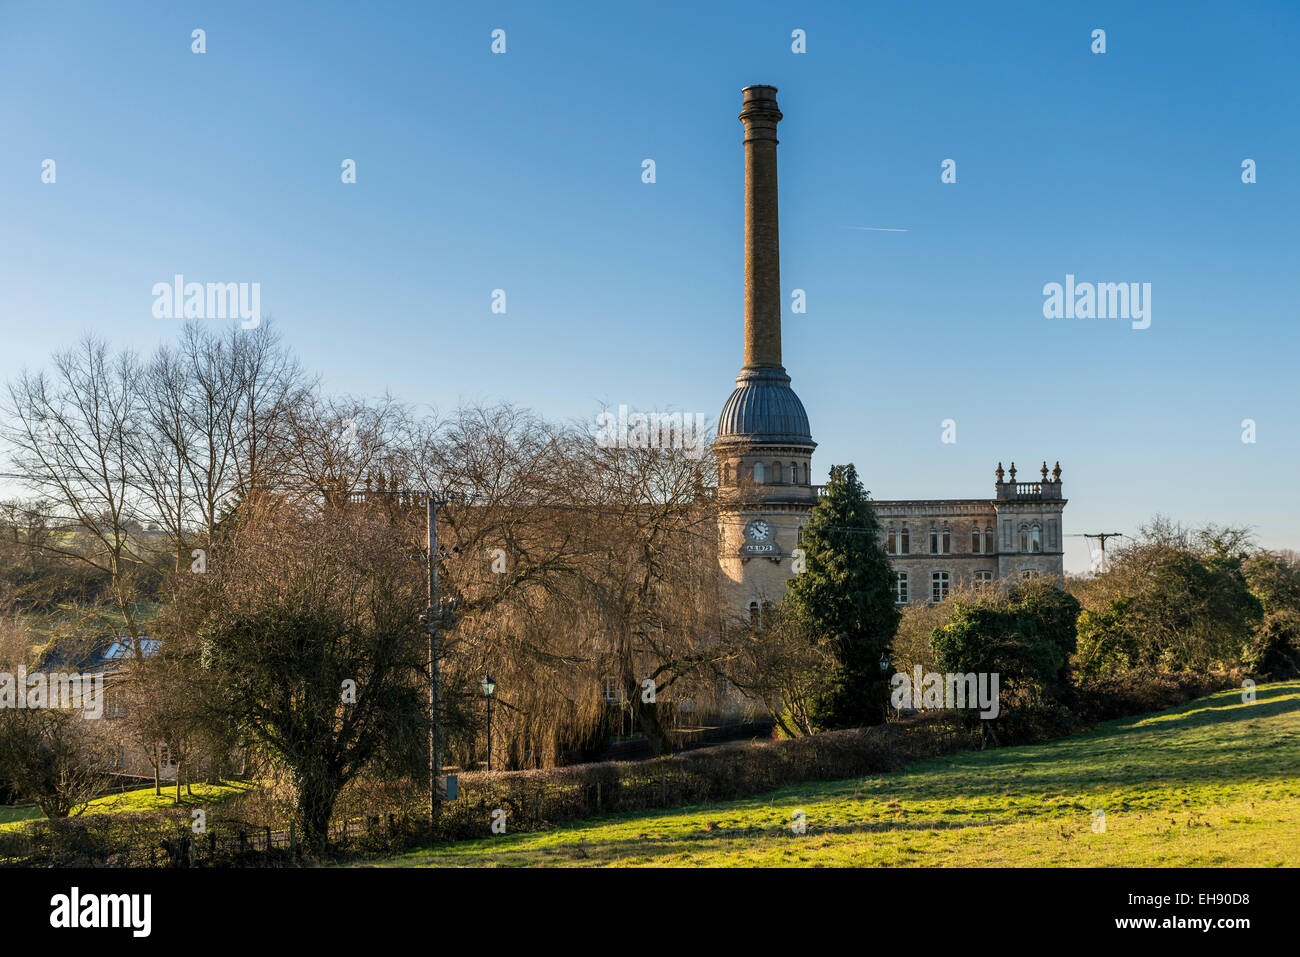 Bliss Mill is a former Tweed Mill in Chipping Norton in the Cotswolds, Oxfordshire. The Mill has now been converted to flats. Stock Photo